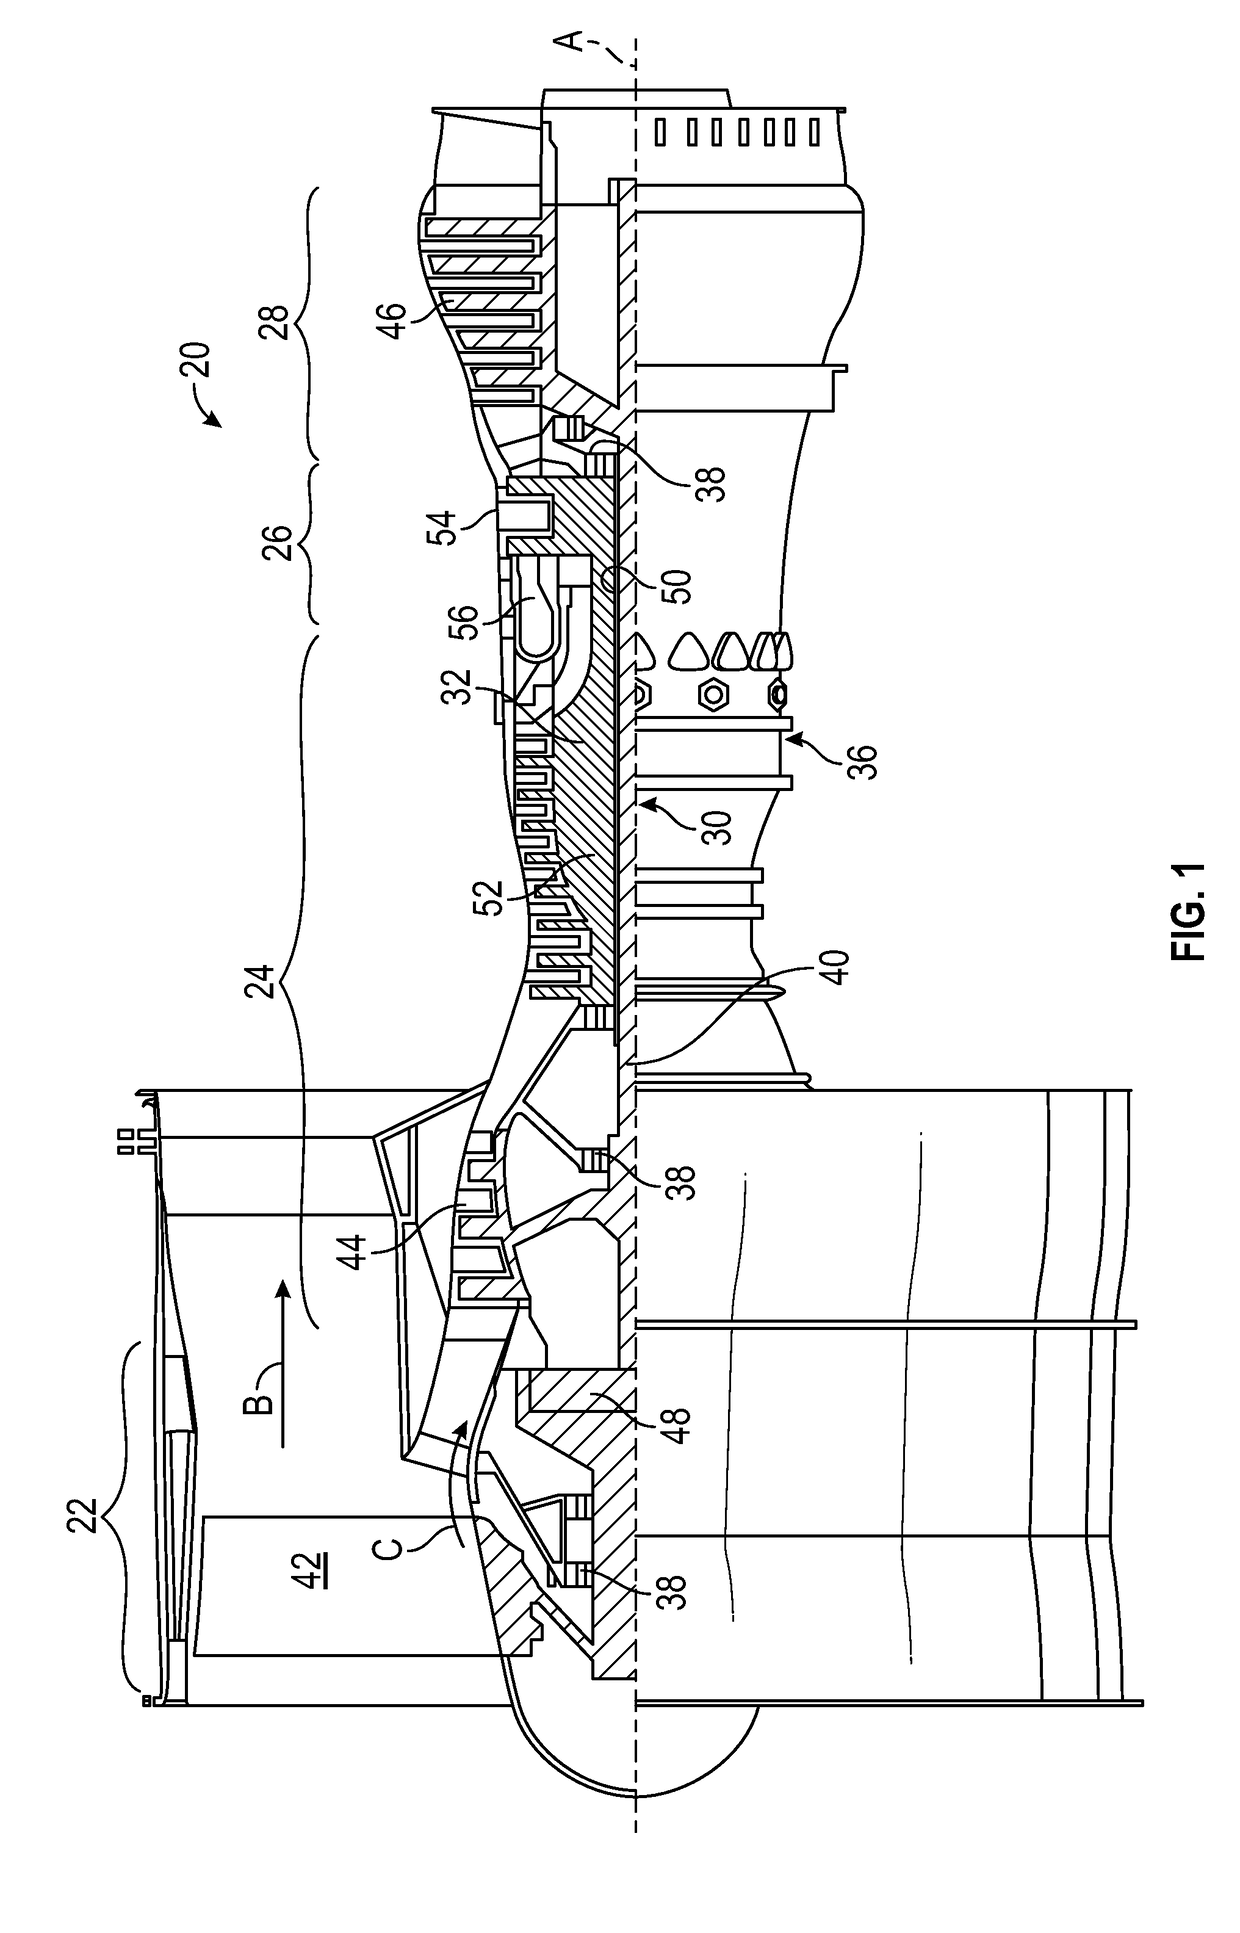 Aft flowing serpentine cavities and cores for airfoils of gas turbine engines